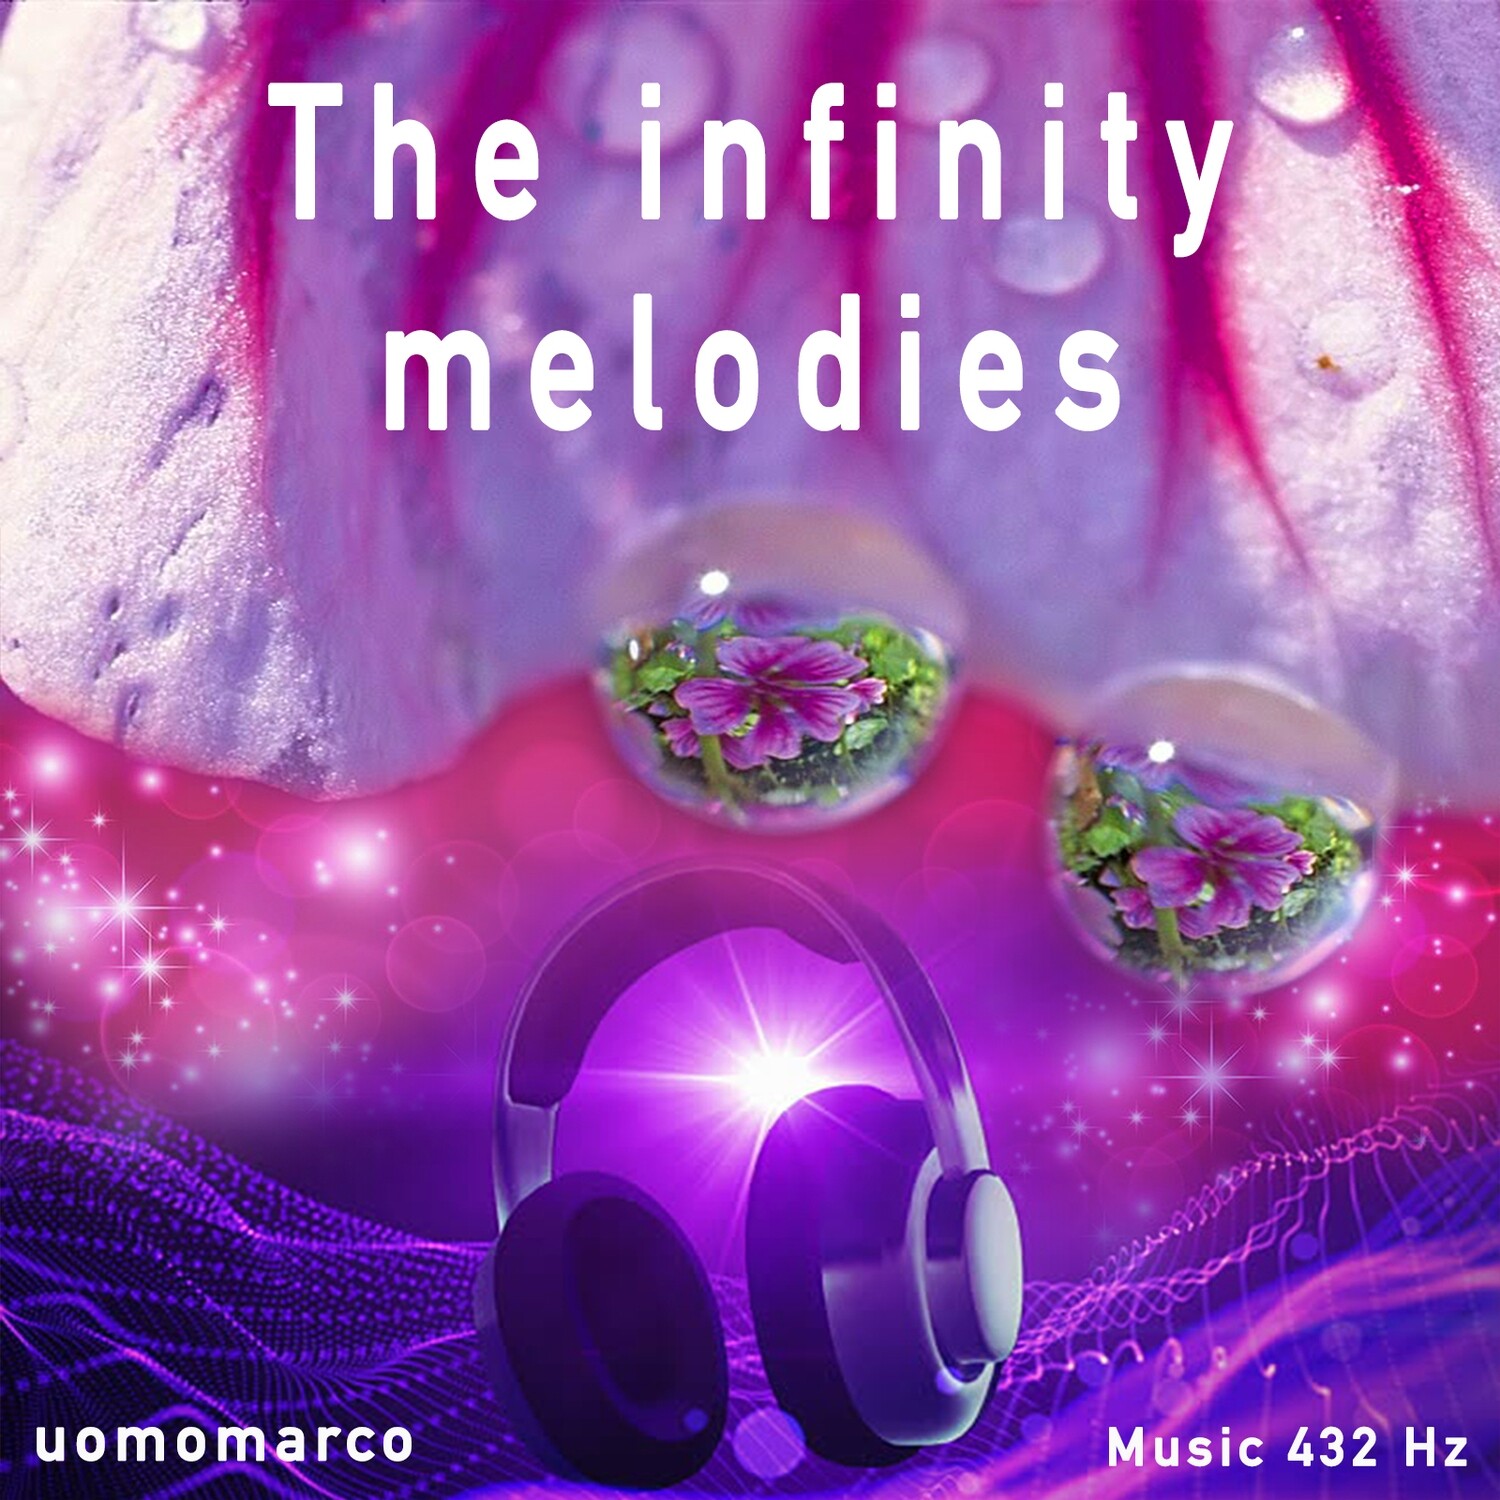 The infinity melodies